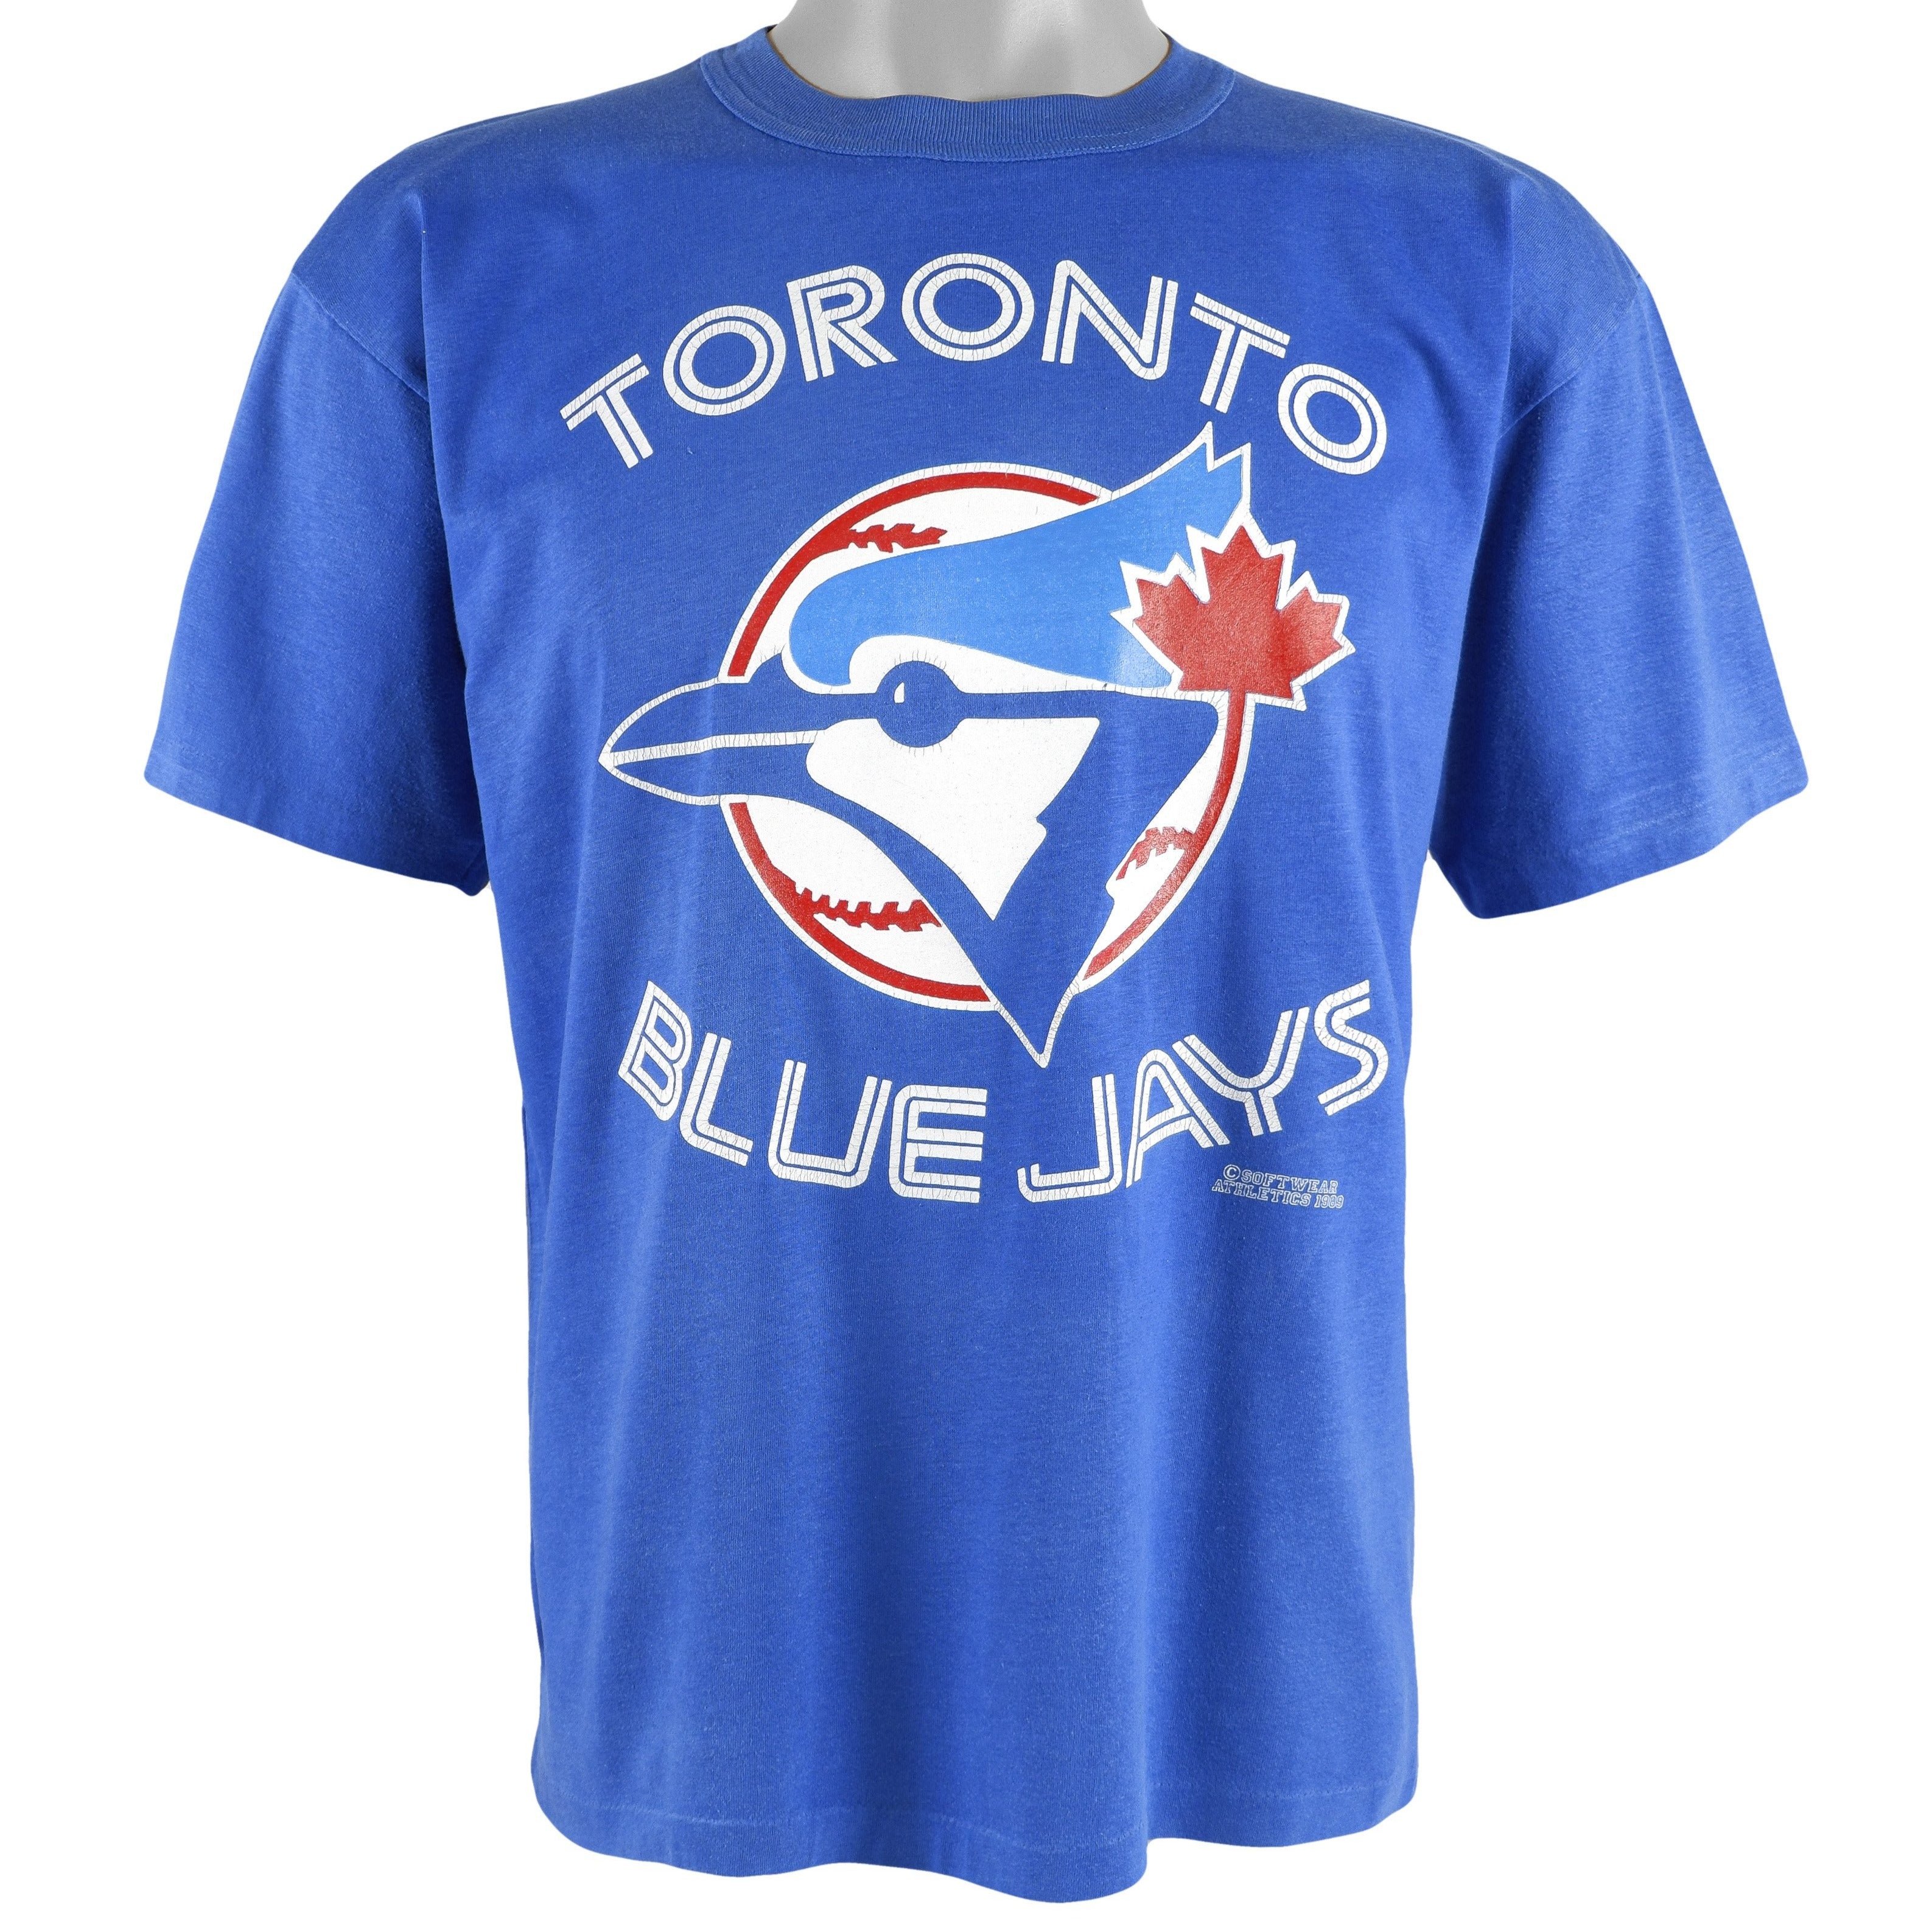 Vintage MLB (Softwear) - Toronto Blue Jays Spell-Out T-Shirt 1990s